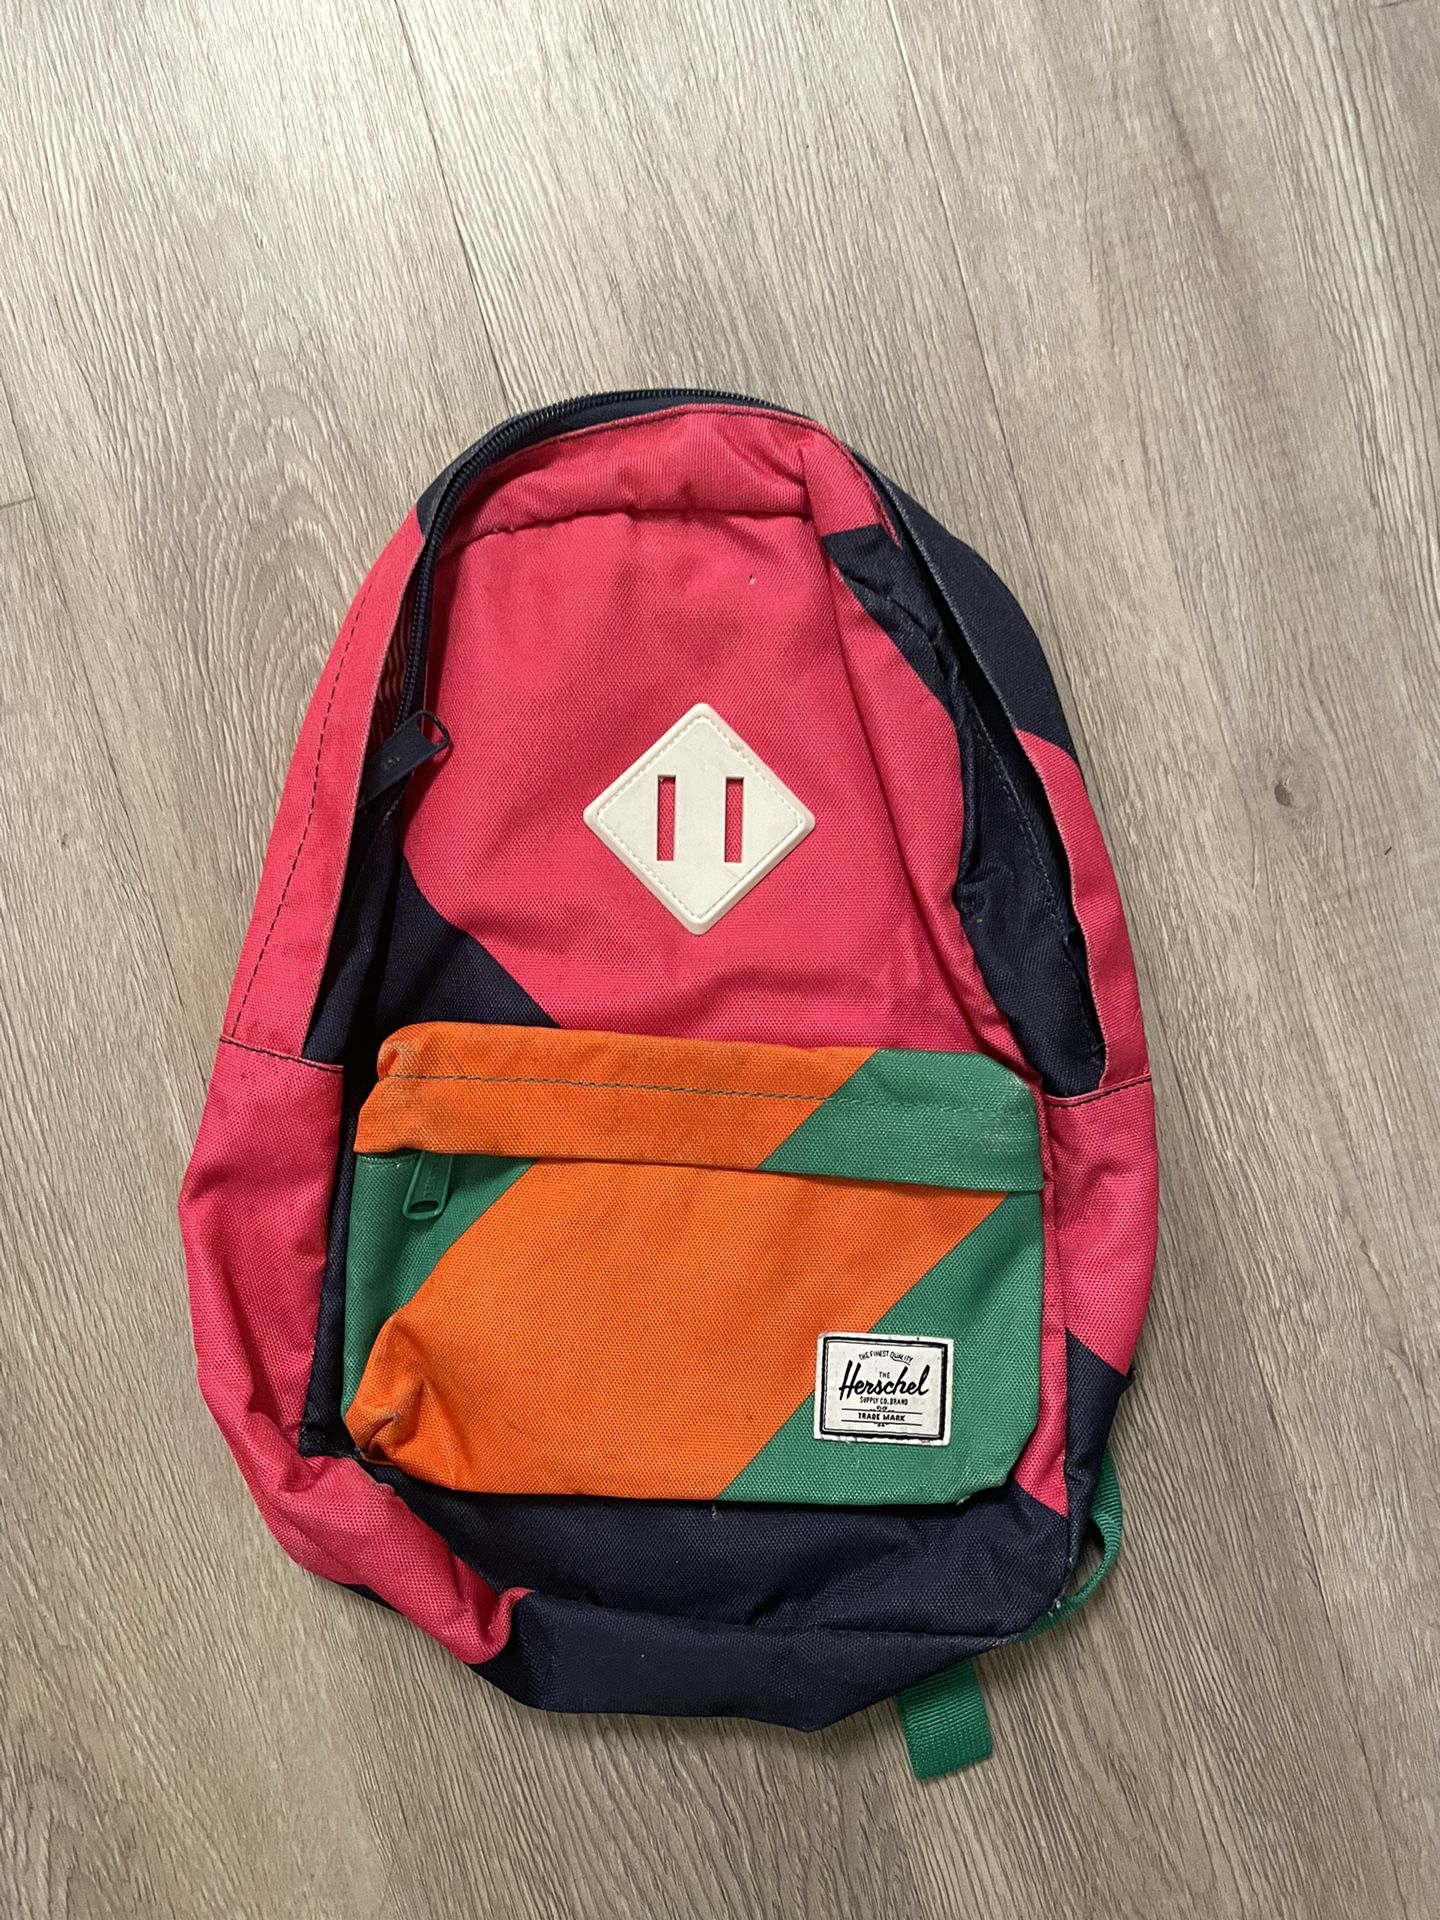 Multicolor -pink orange green blue Herschel Kids Heritage Backpack book bag Used, has stains and some wear. Please see pics for condition  13"x10"